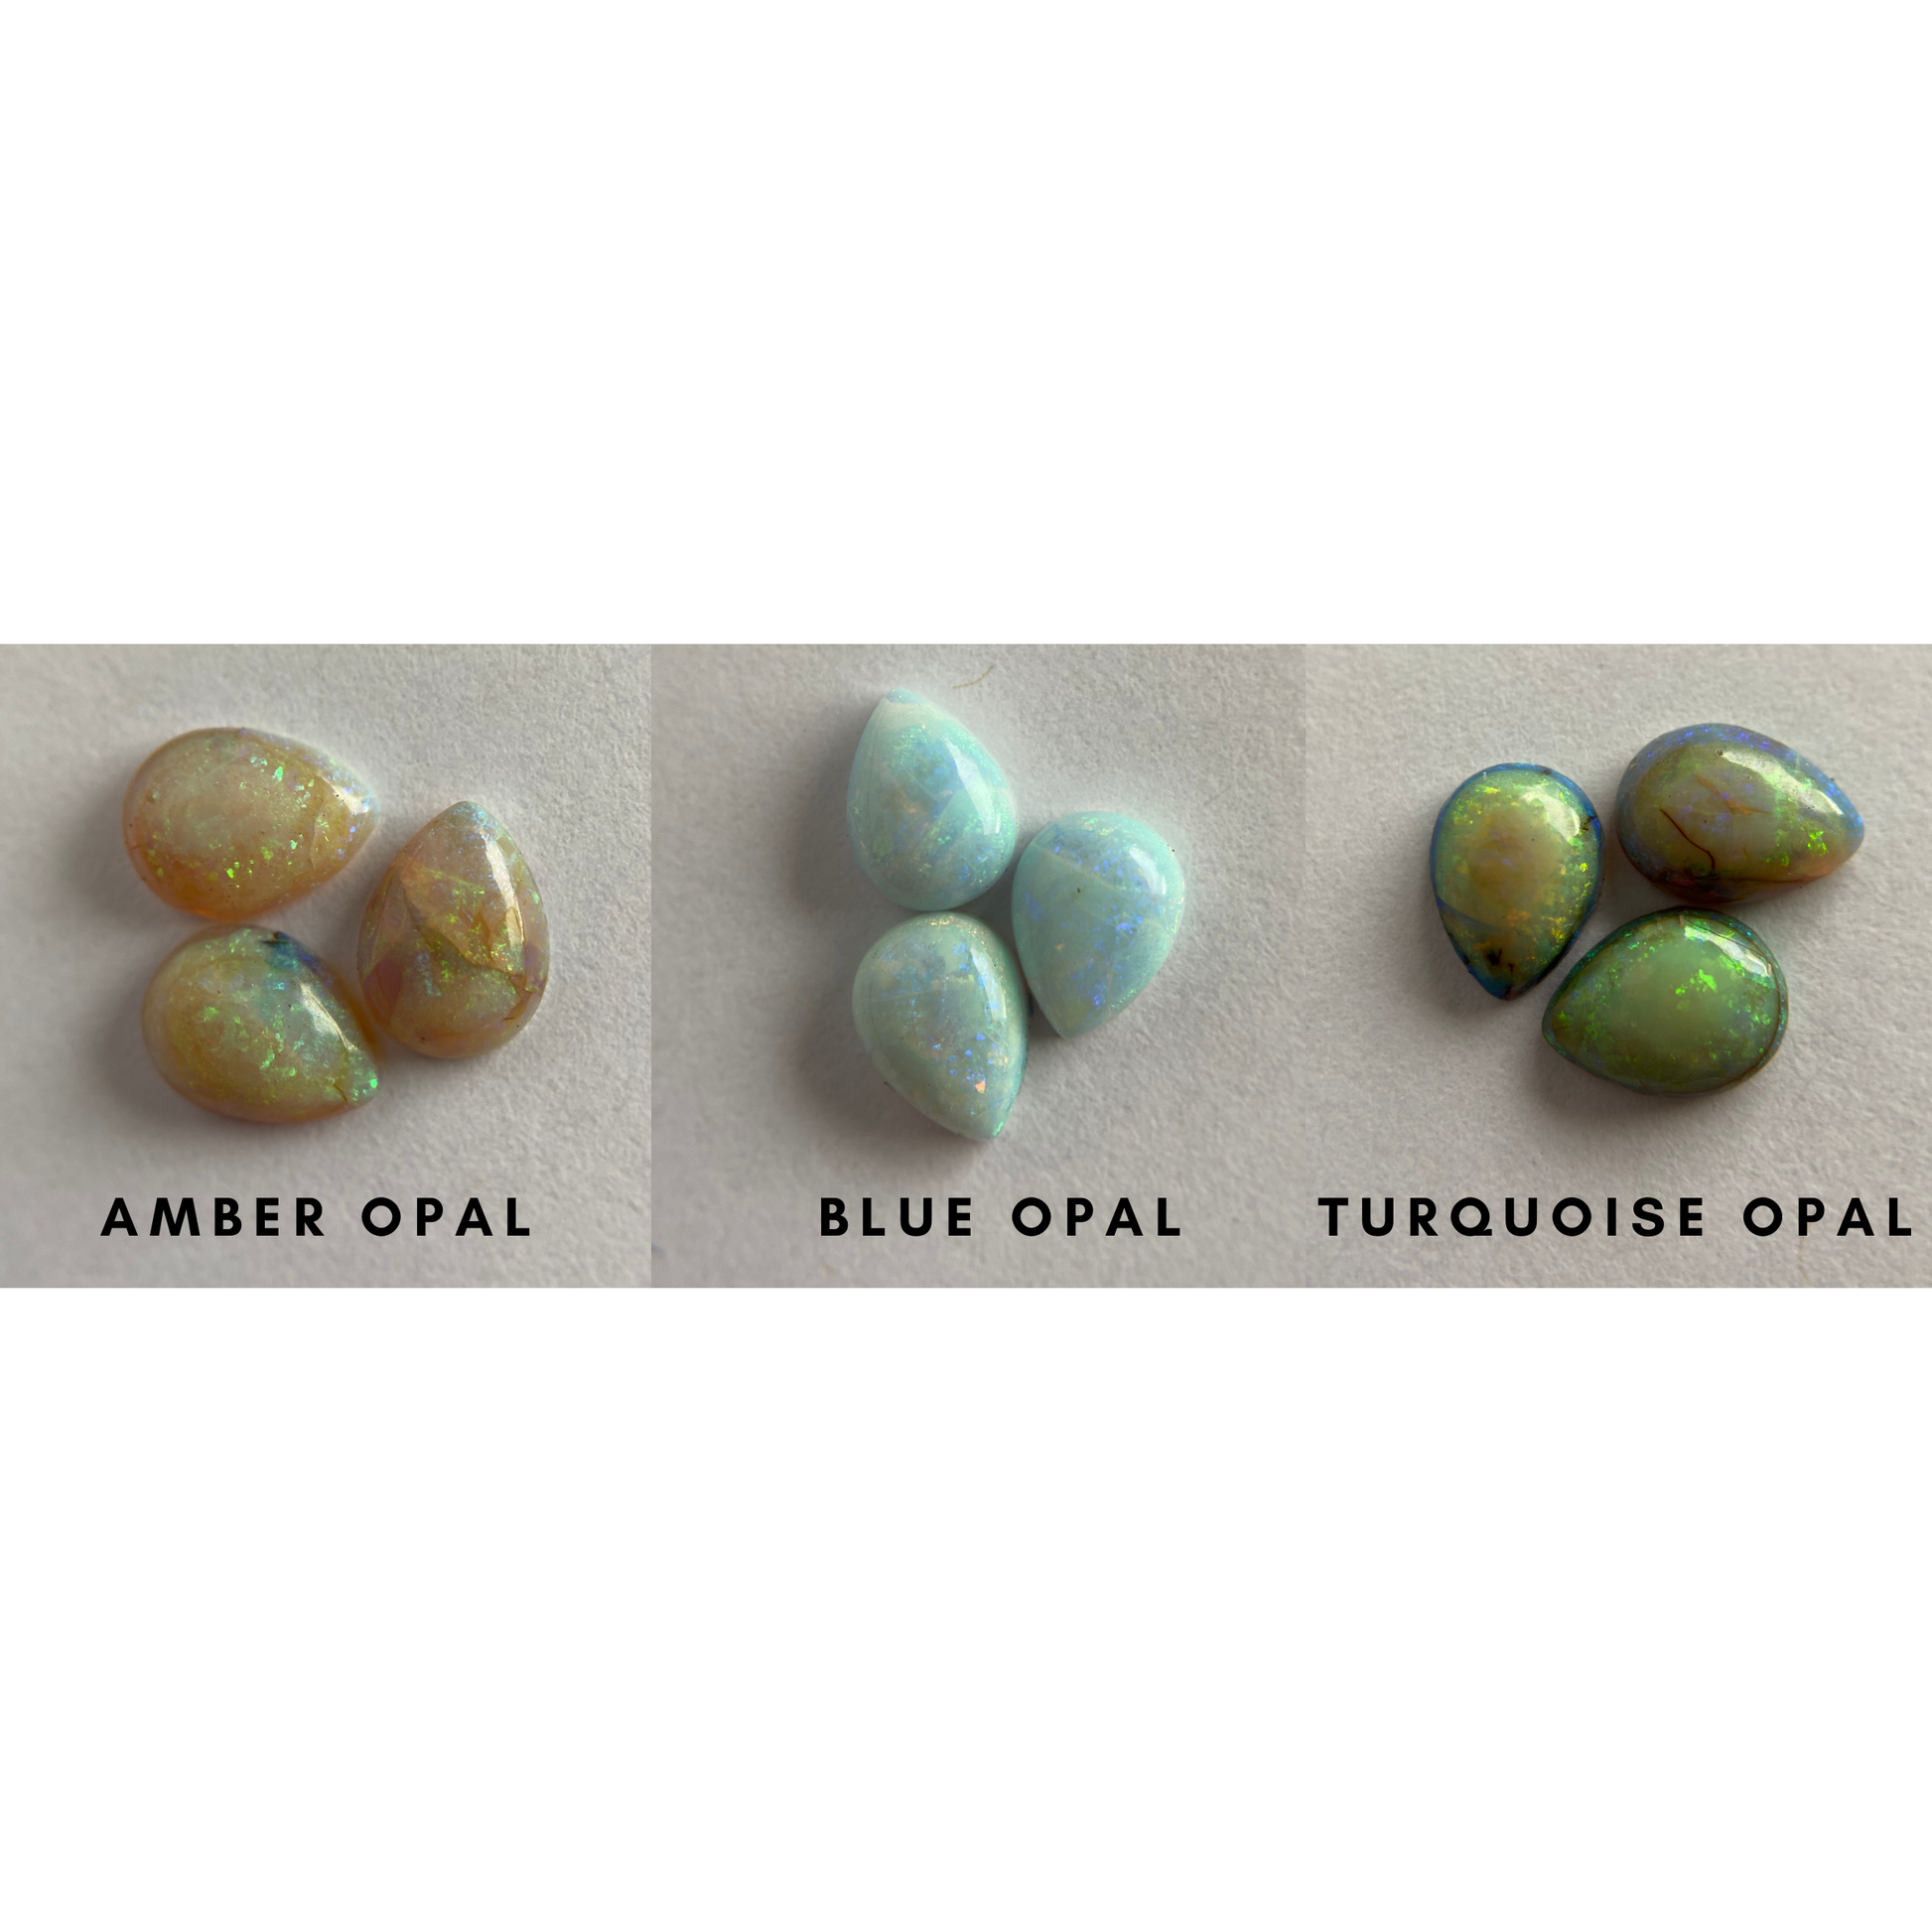 Lab grown opals in three different color ways, amber opal, blue opal and turquoise opal.